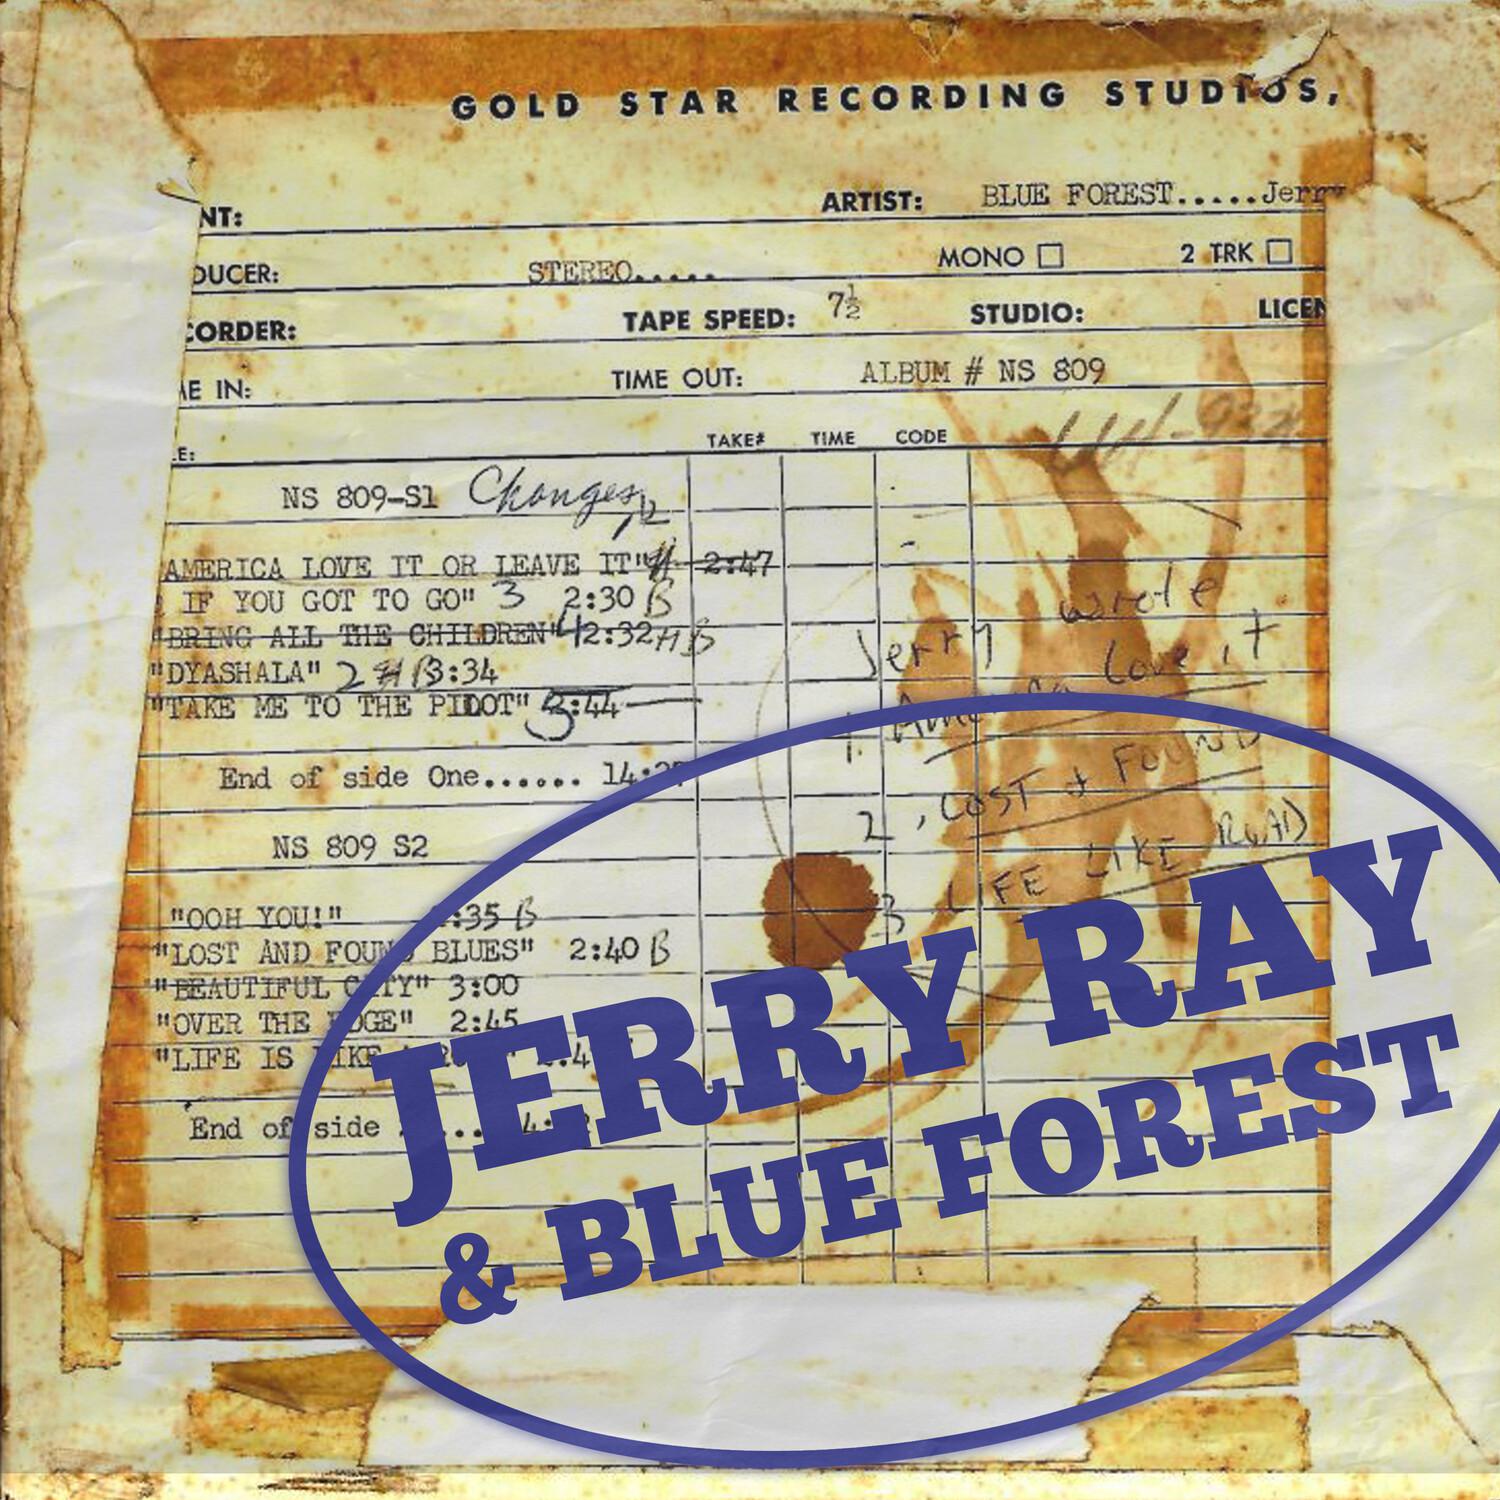 Jerry Ray & Blue Forest